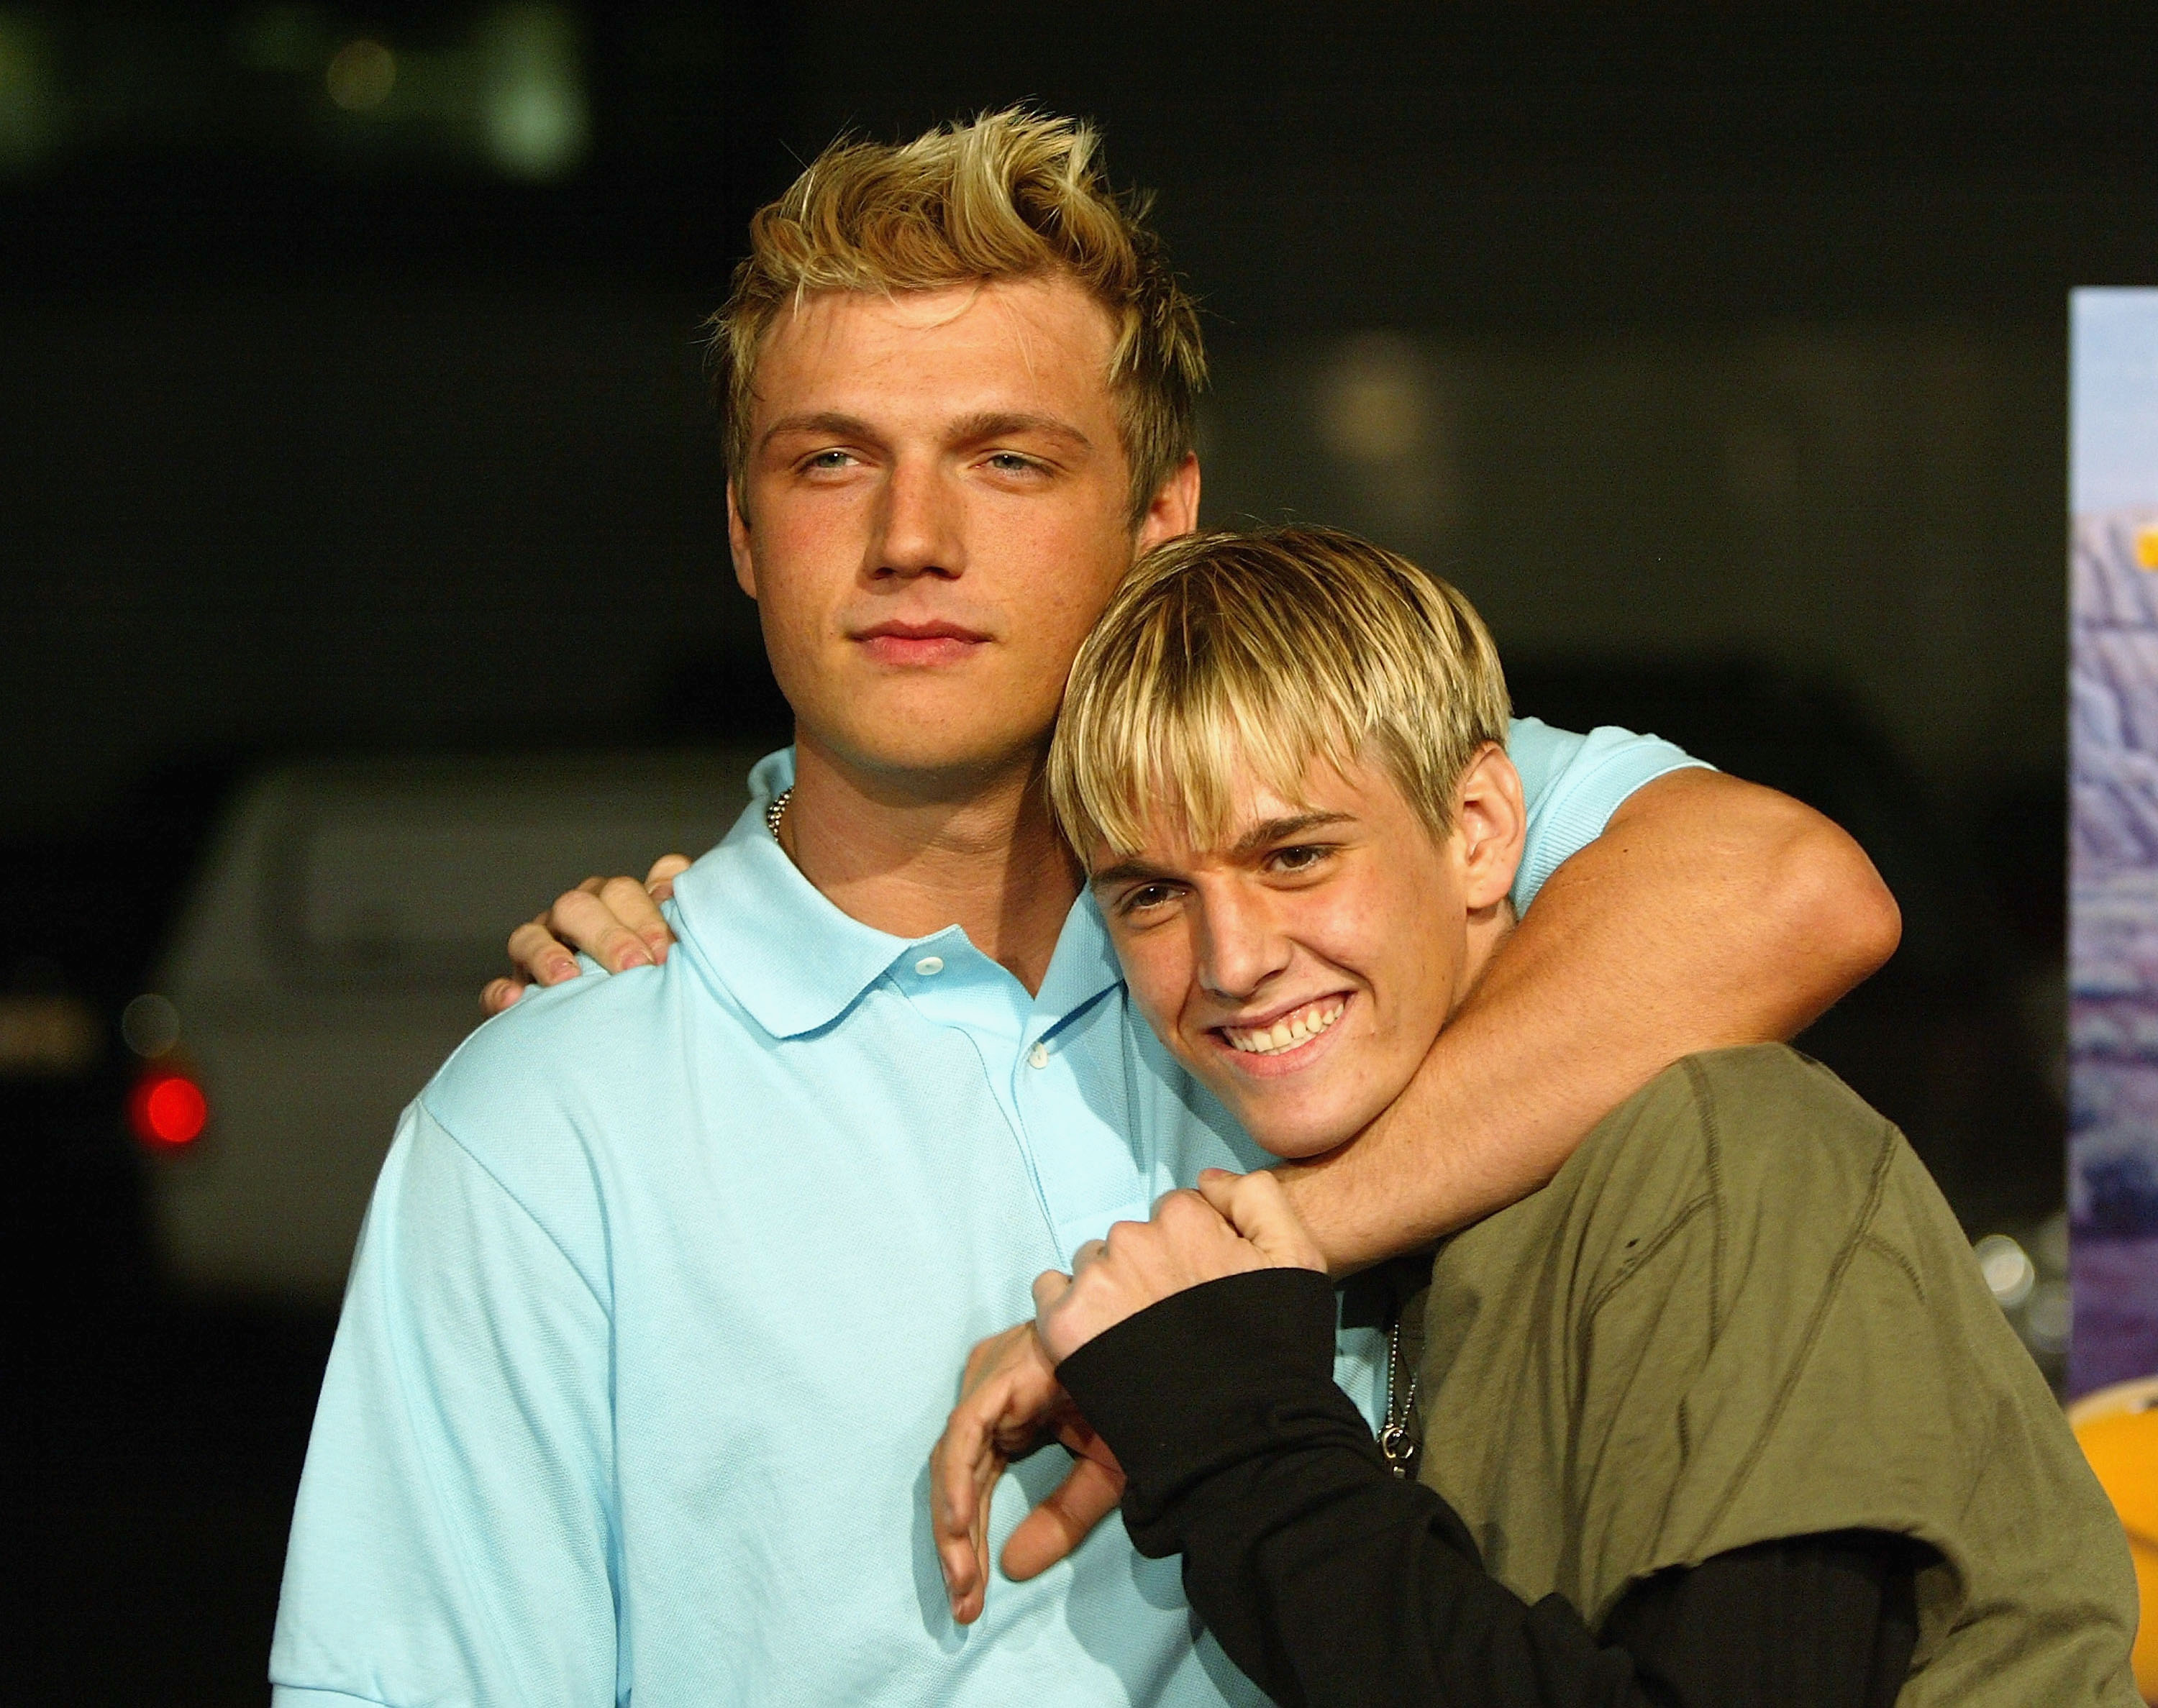 Aaron and Nick Carter arrive for the "Simple Life 2" Welcome Home Party at The Spider Club in Hollywood, California, on April 14, 2004. | Source: Getty Images